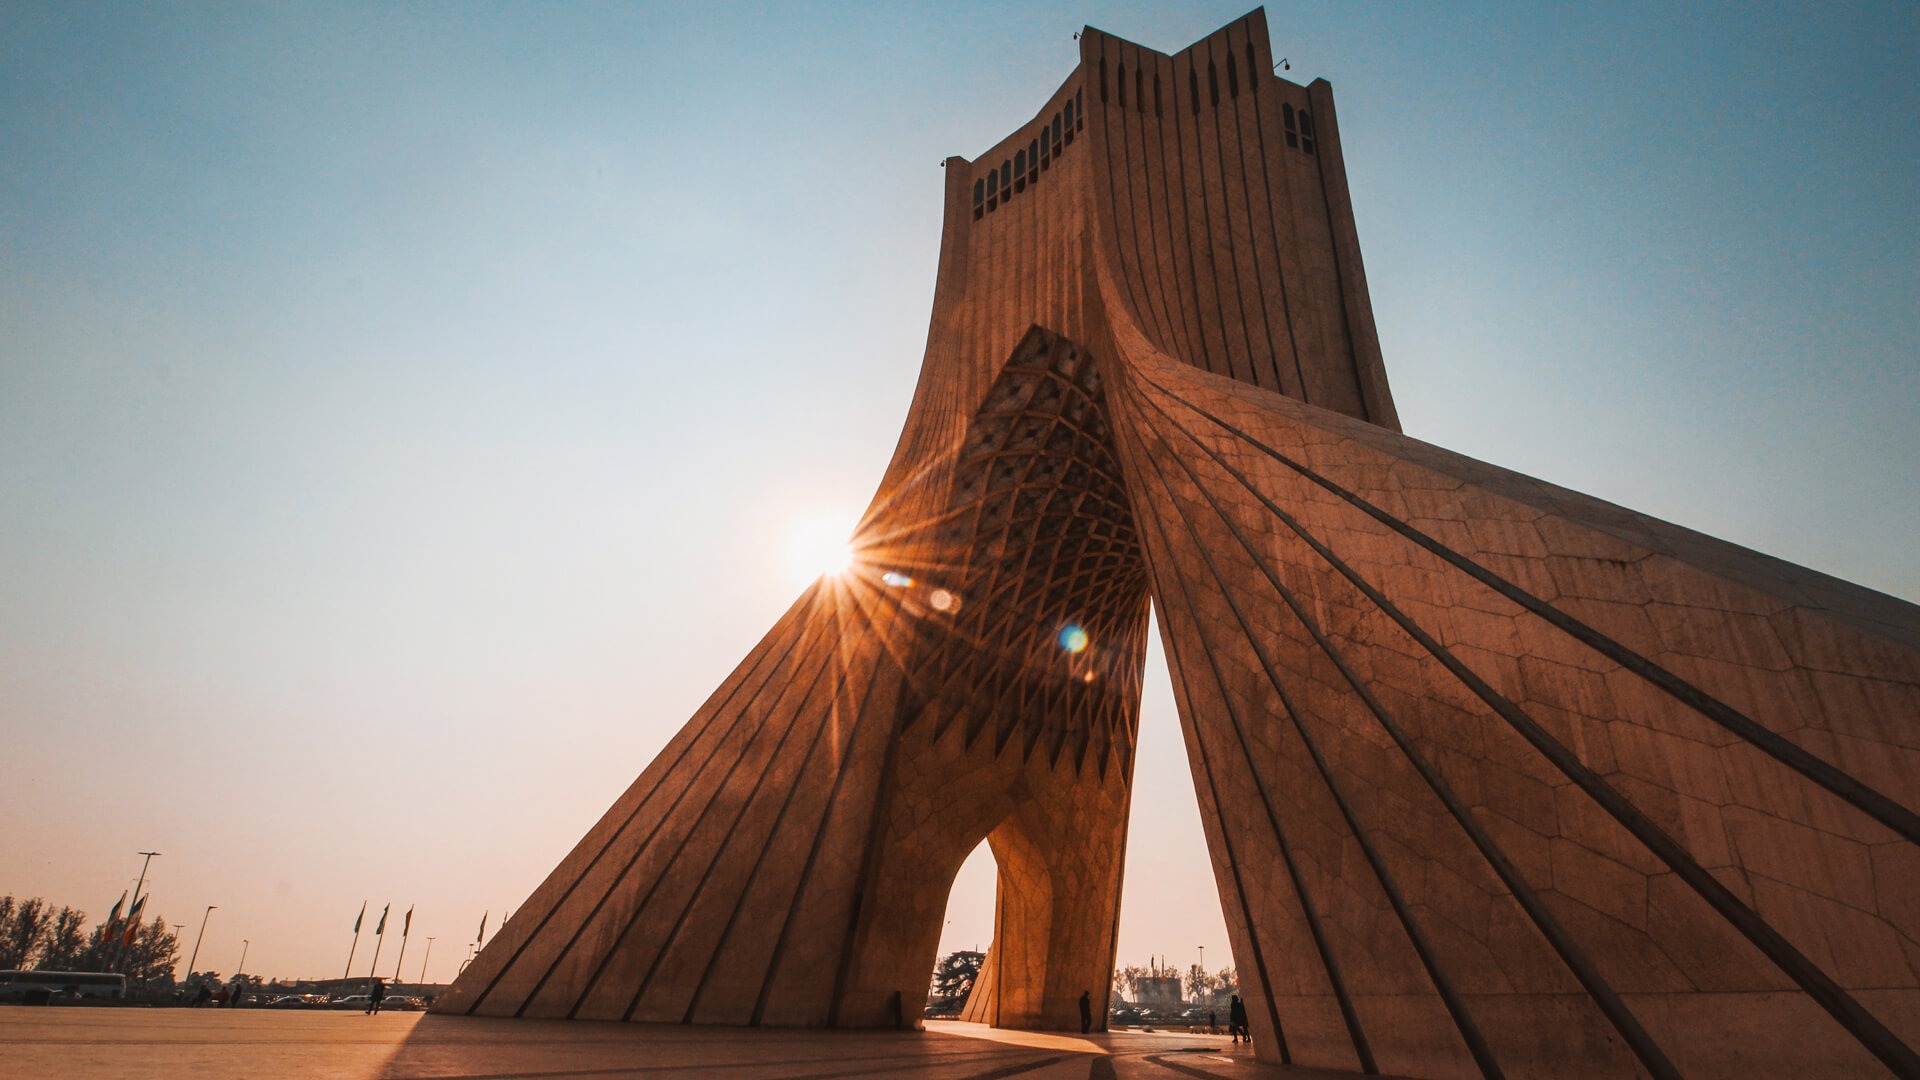 Iran land of business opportunities